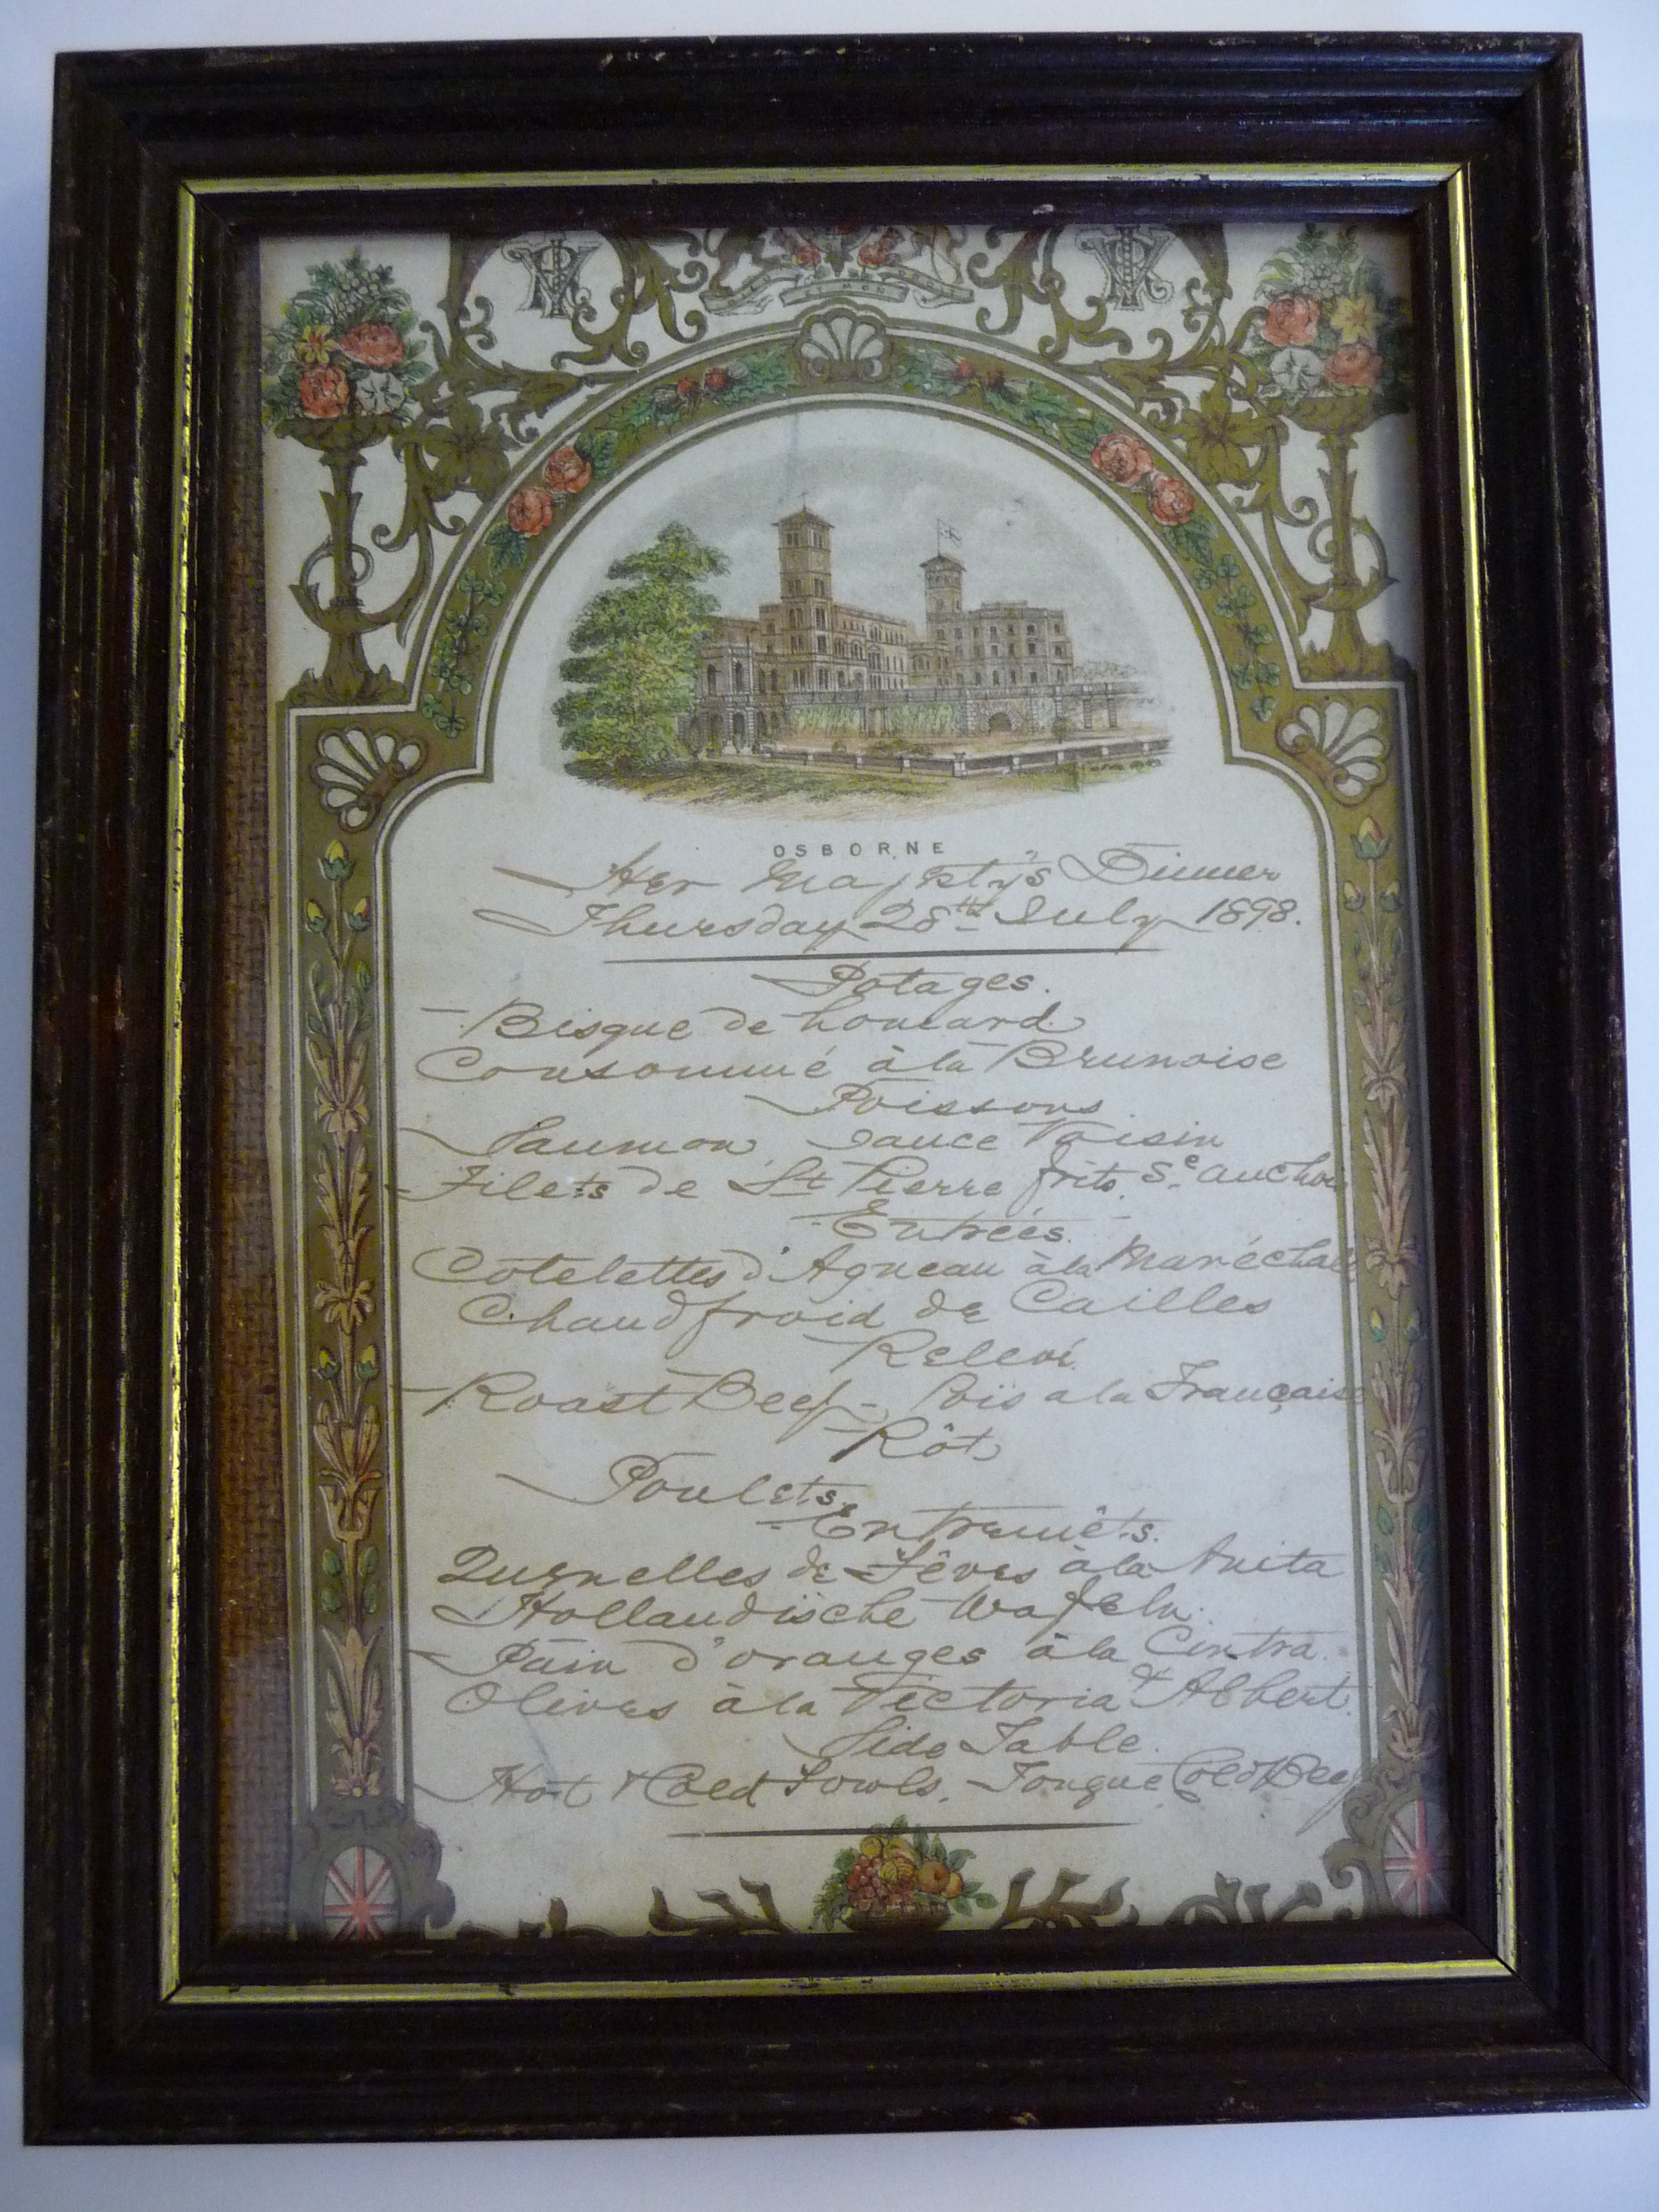 A handwritten menu for Her Majesty's dinner at Osborne House on Thursday 28th July 1898 7'' x 5''